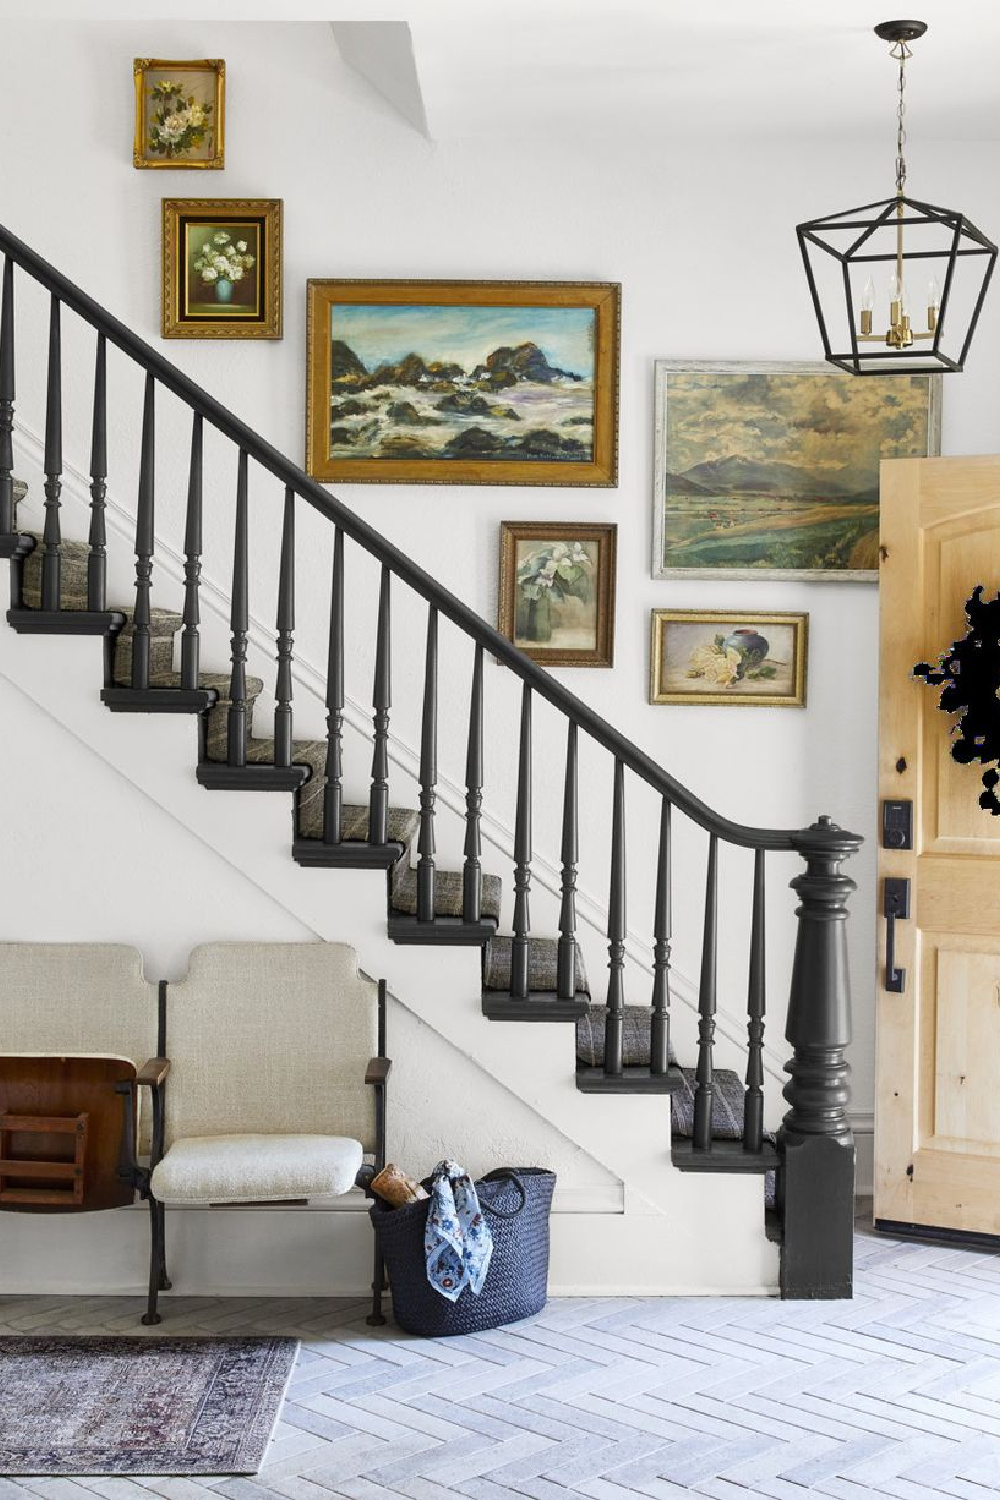 Lovely art decorating a black painted staircase in a country home - Country Living (Kim Cornelison). #countrystaircase